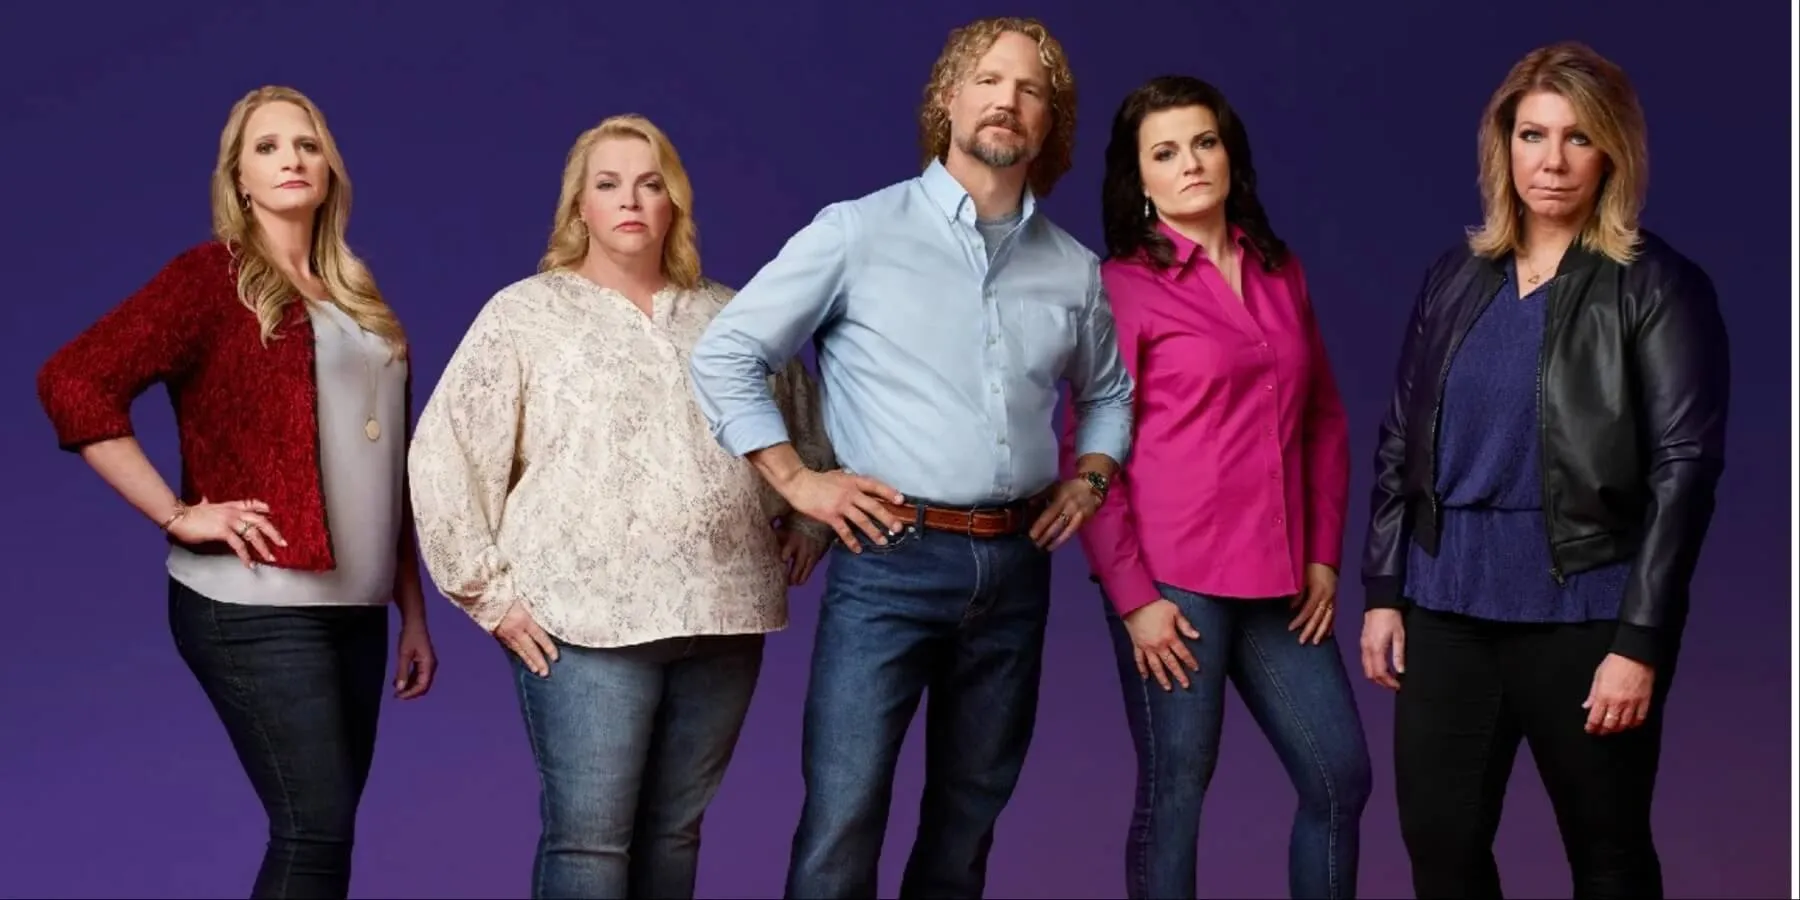 The cast of TLC's 'Sister Wives'